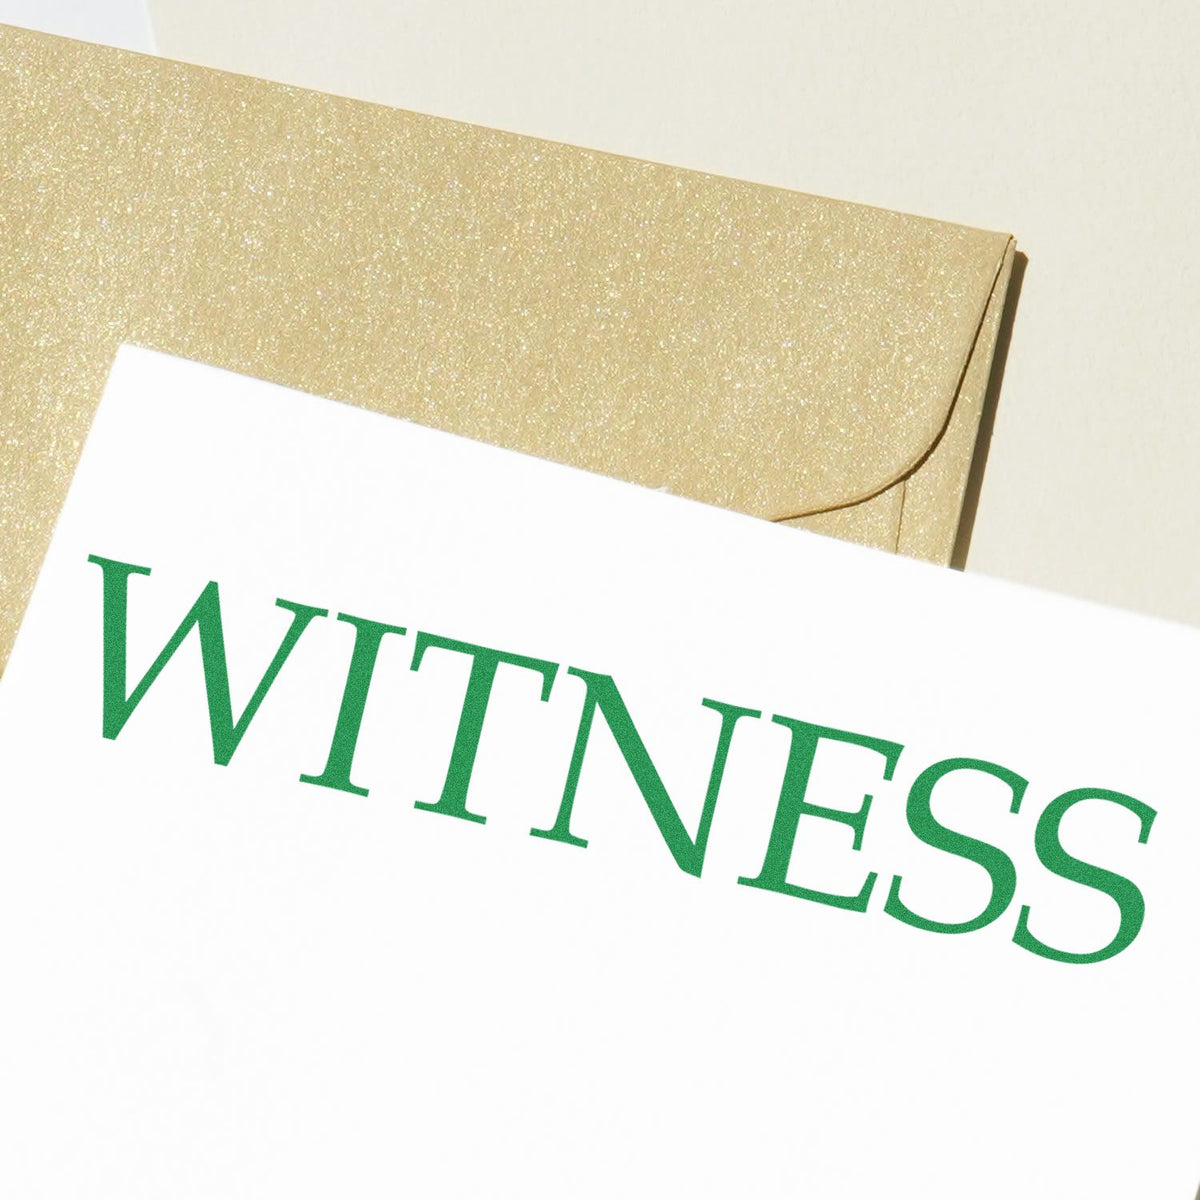 Large Witness Rubber Stamp In Use